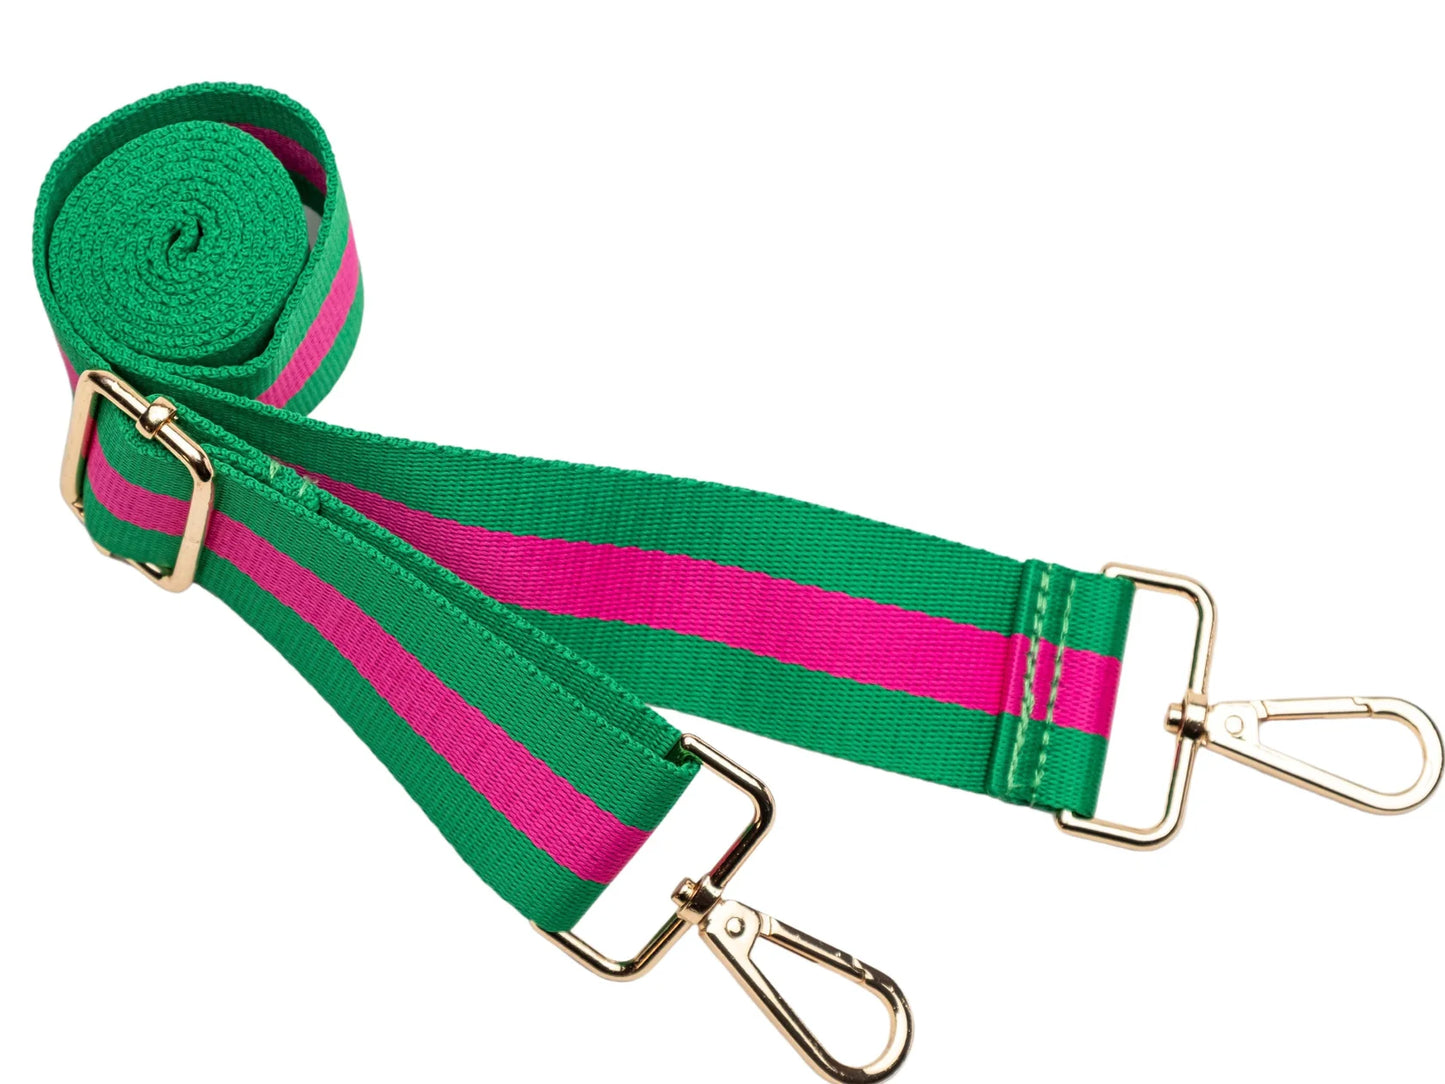 Green & Hot Pink Bag Strap with Gold Hardware